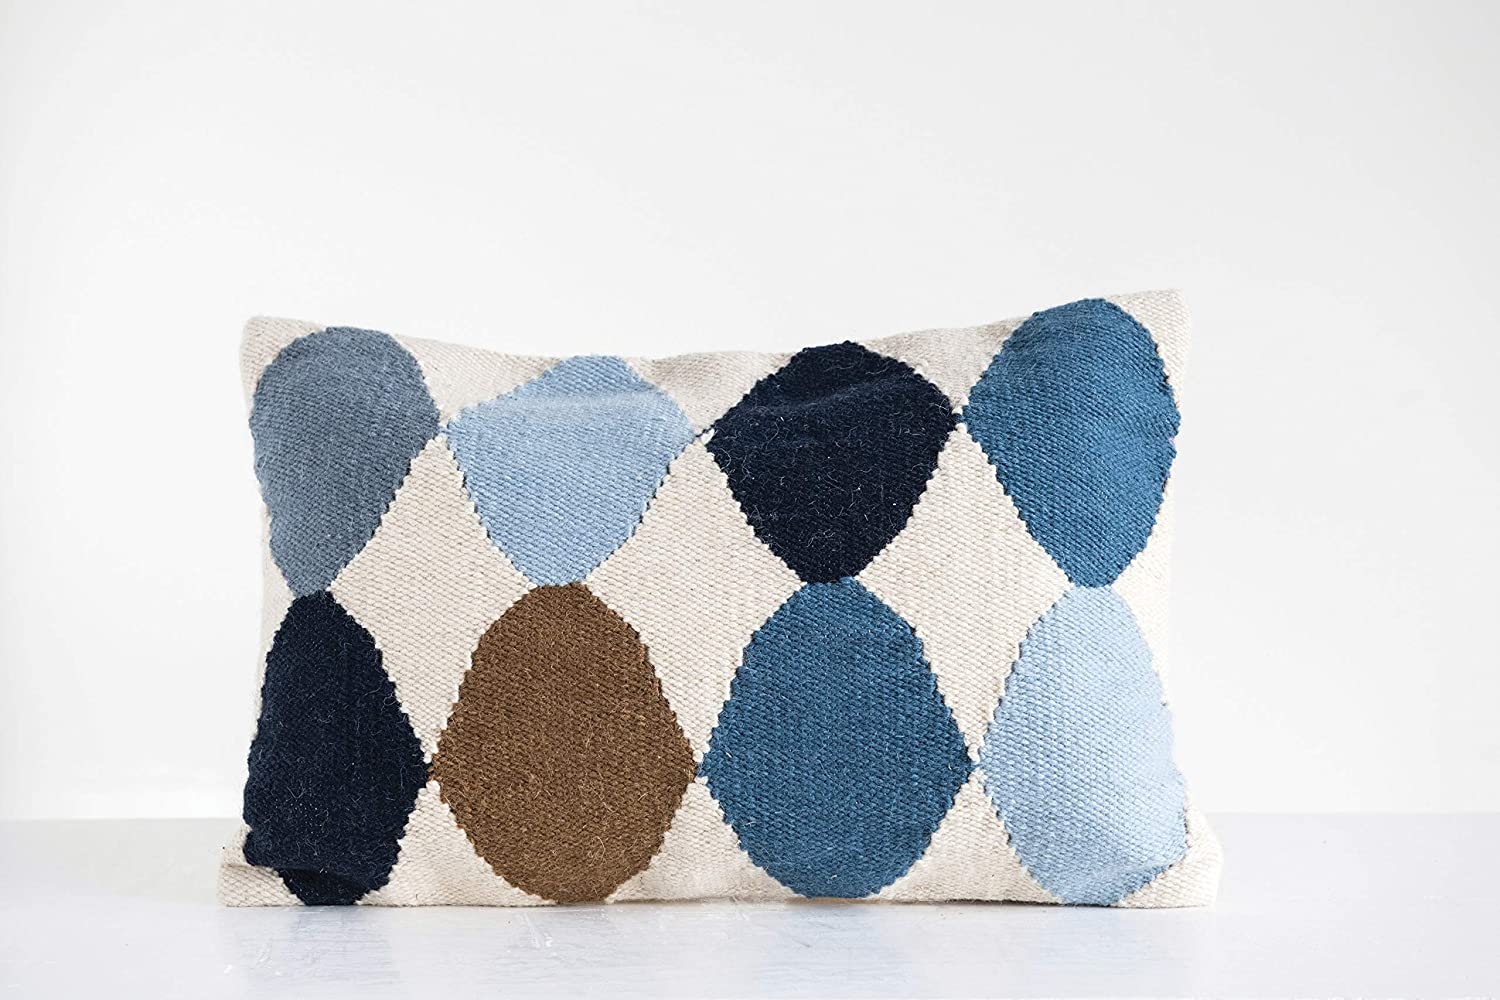 Wool Blend Lumbar Pillow with Pattern, Off-White, Blue & Brown, 26" x 16" - Image 2